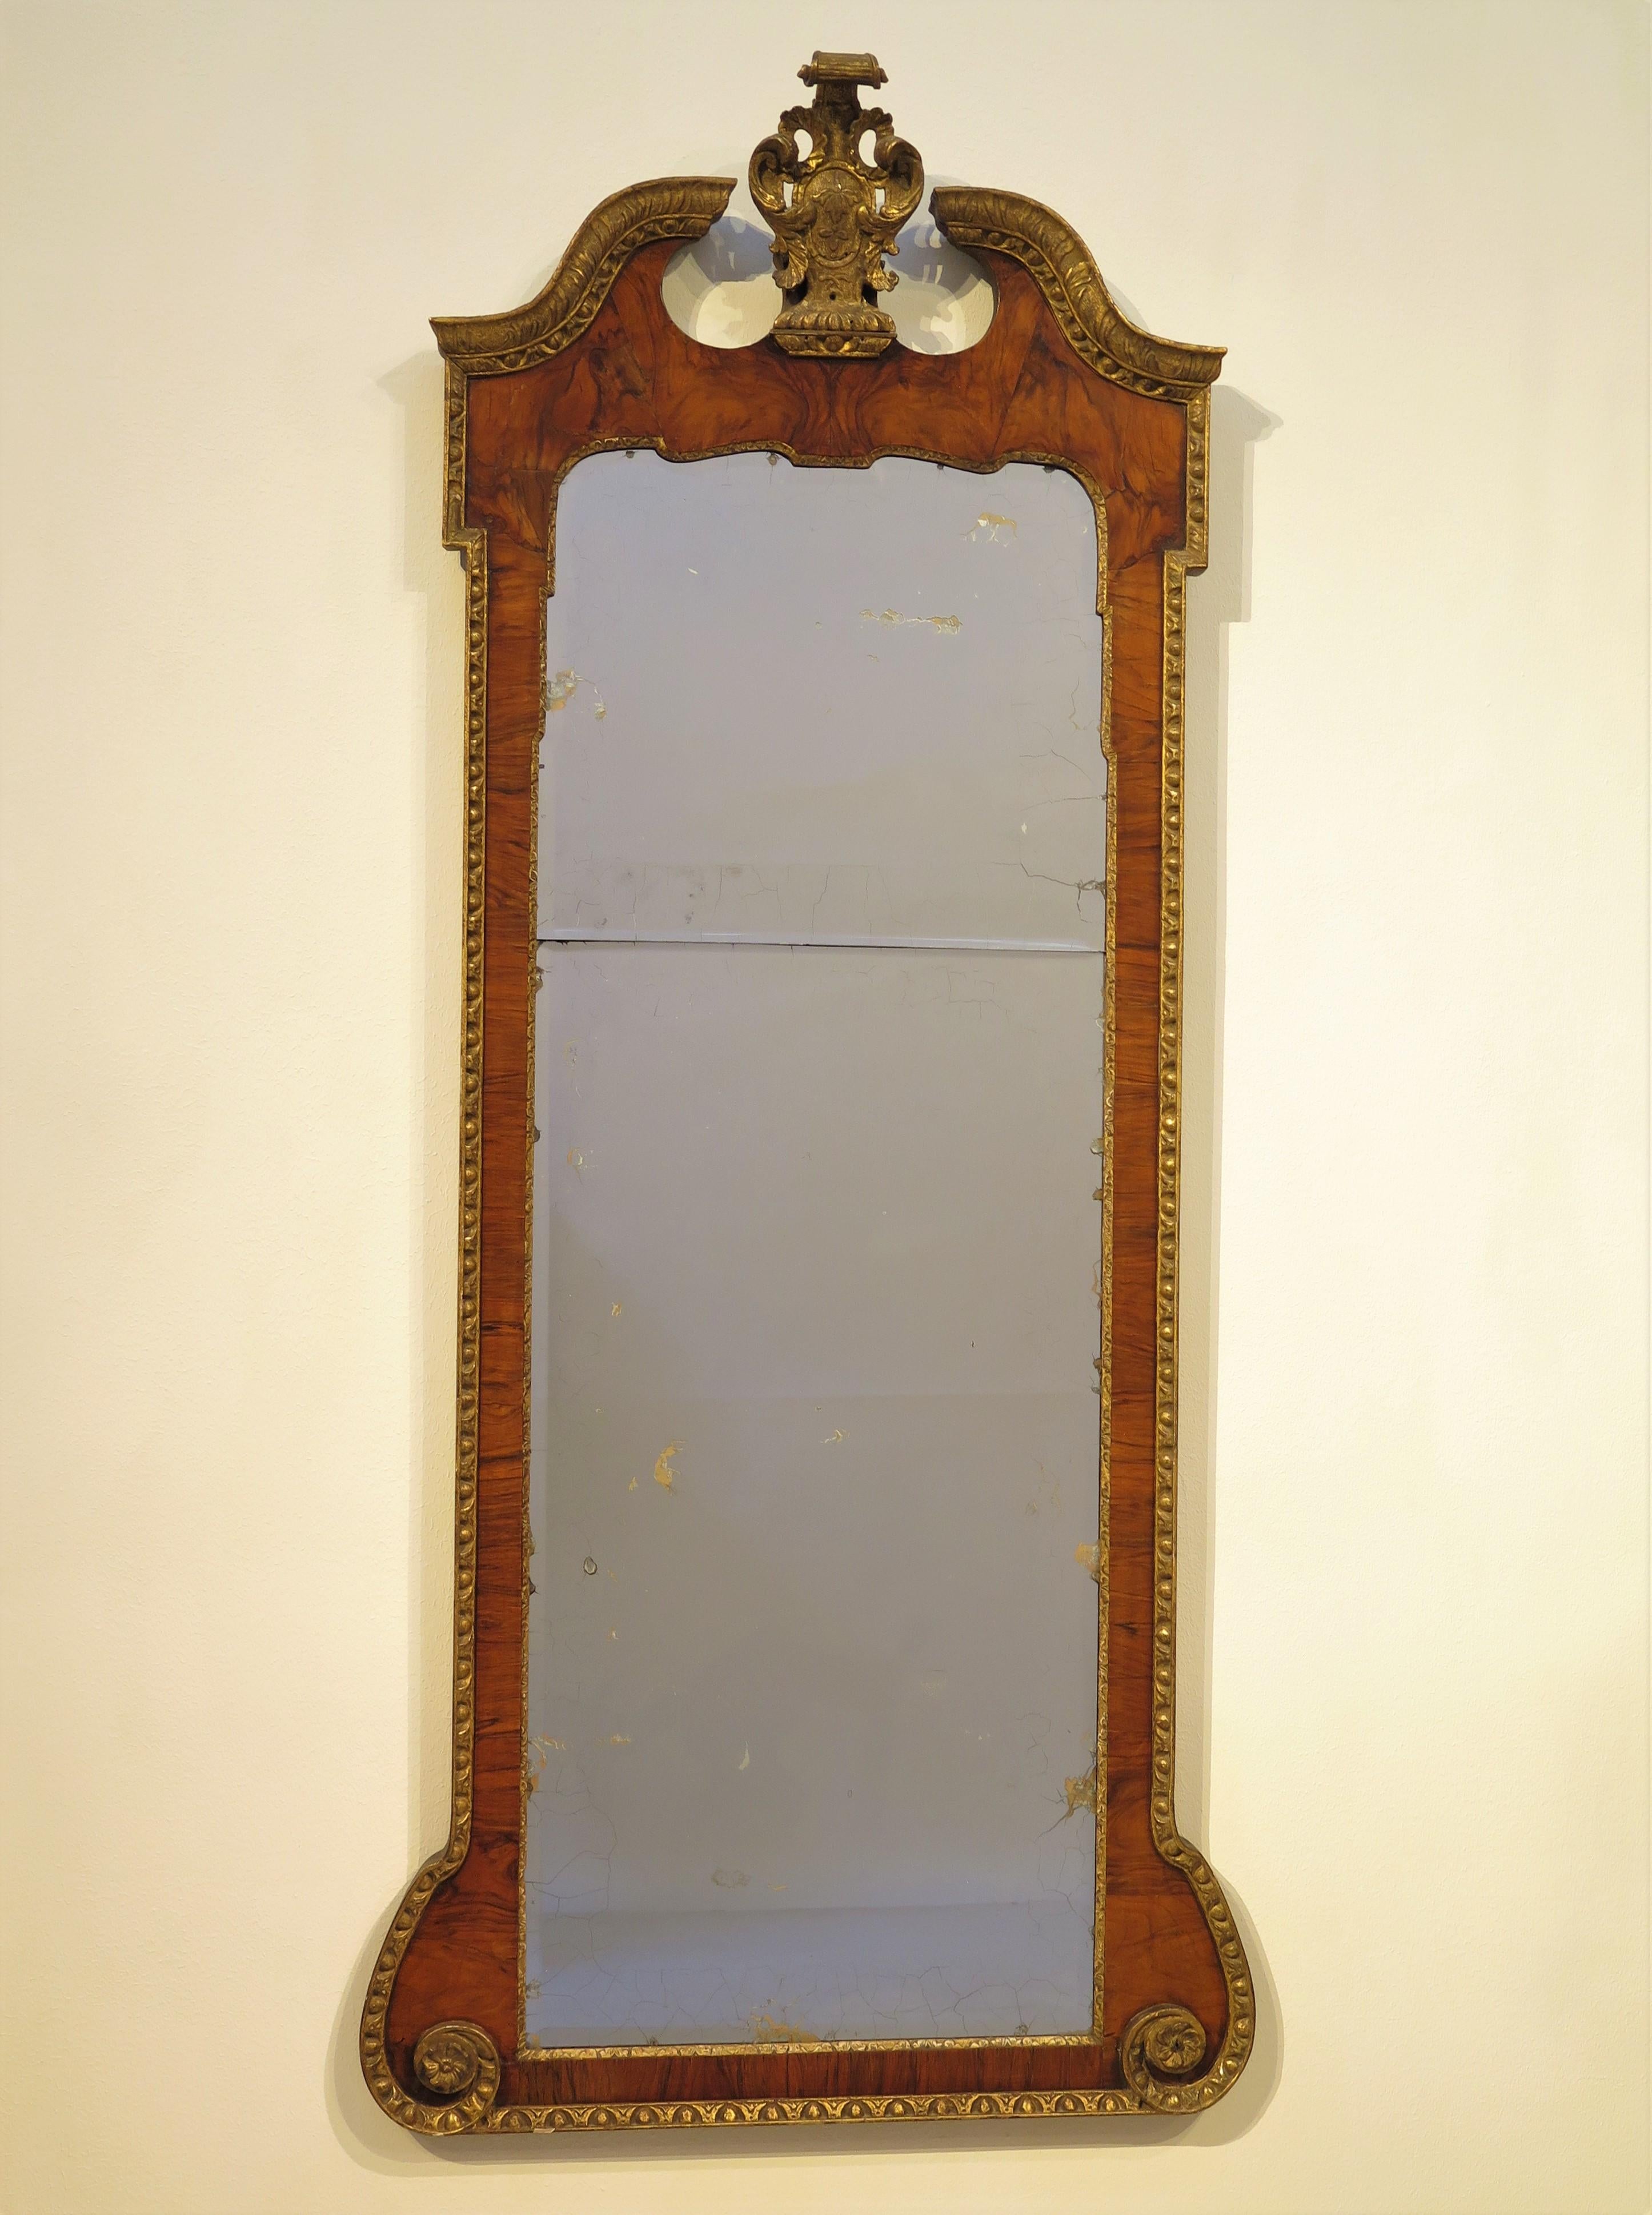 large, just over 6' tall,  George II walnut pier mirror / looking glass with swan's neck pediment and center crest / cartouche, book matched walnut veneers, having two beveled glass mirrored plates with gilt edging, beautiful patina, mellow gilding,